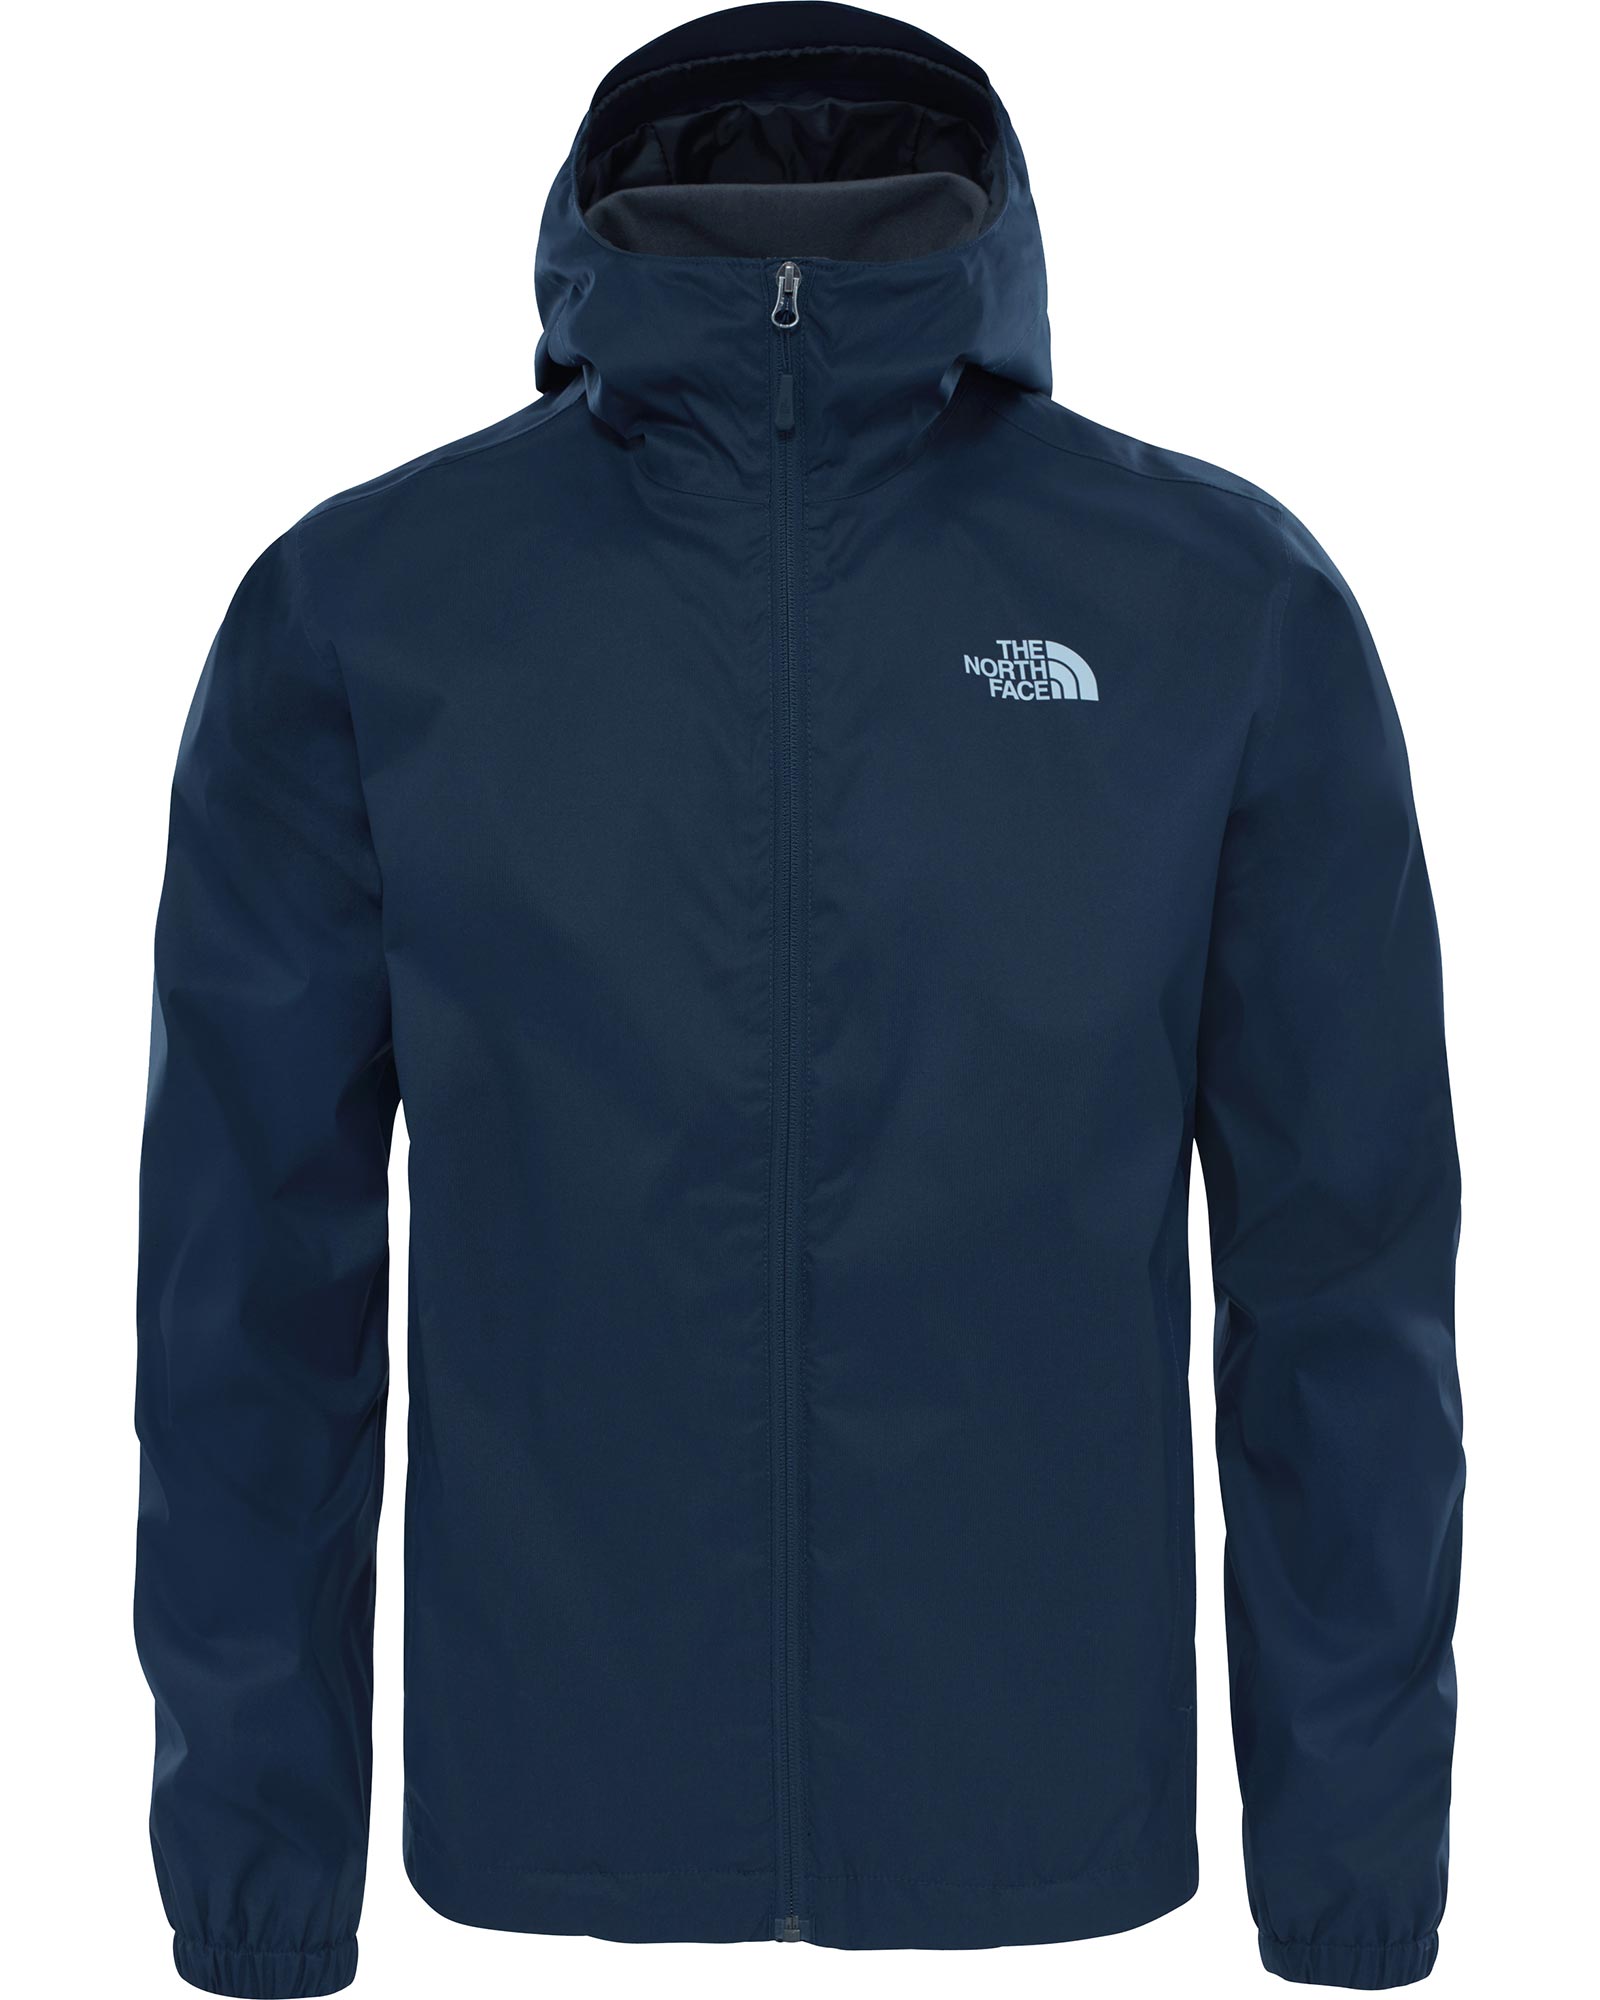 The North Face Quest DryVent Men’s Jacket - Urban Navy S